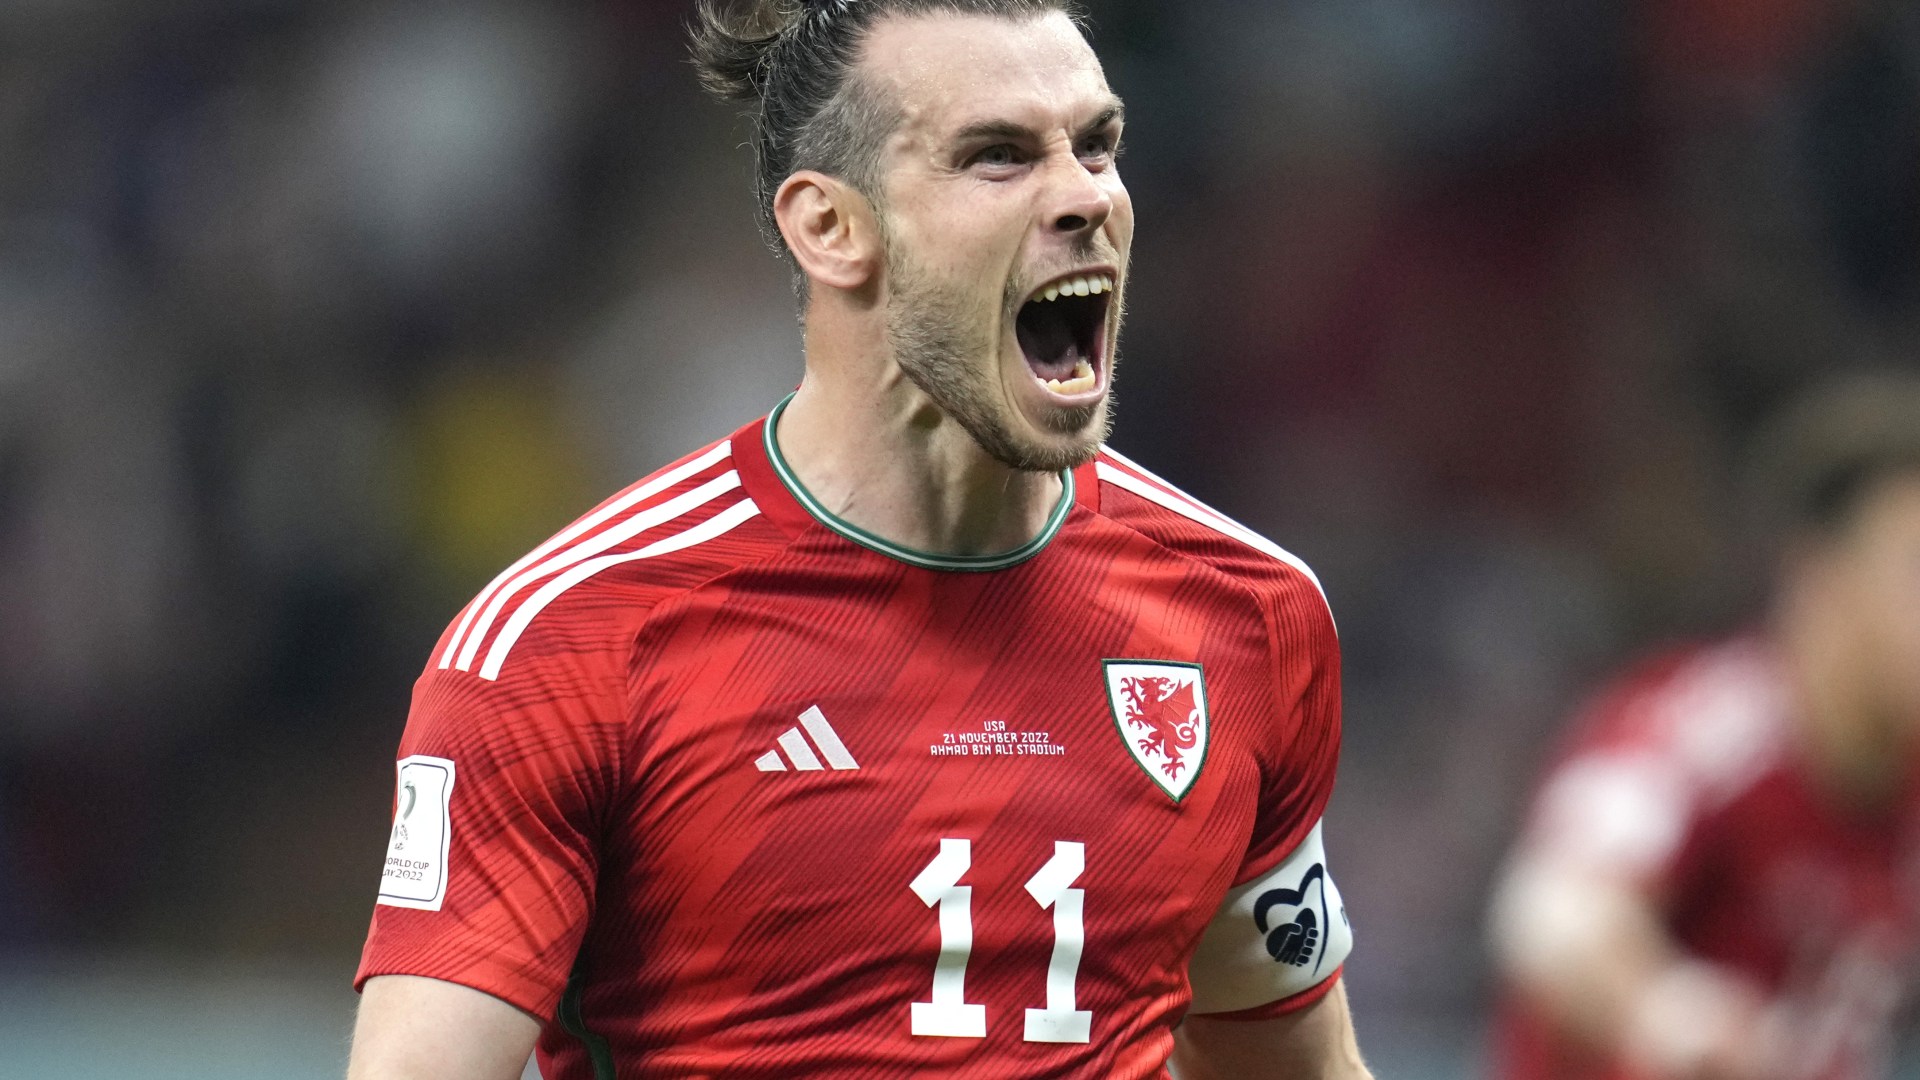 Gareth Bale to return to international duty as footy legend takes up new role with Wales